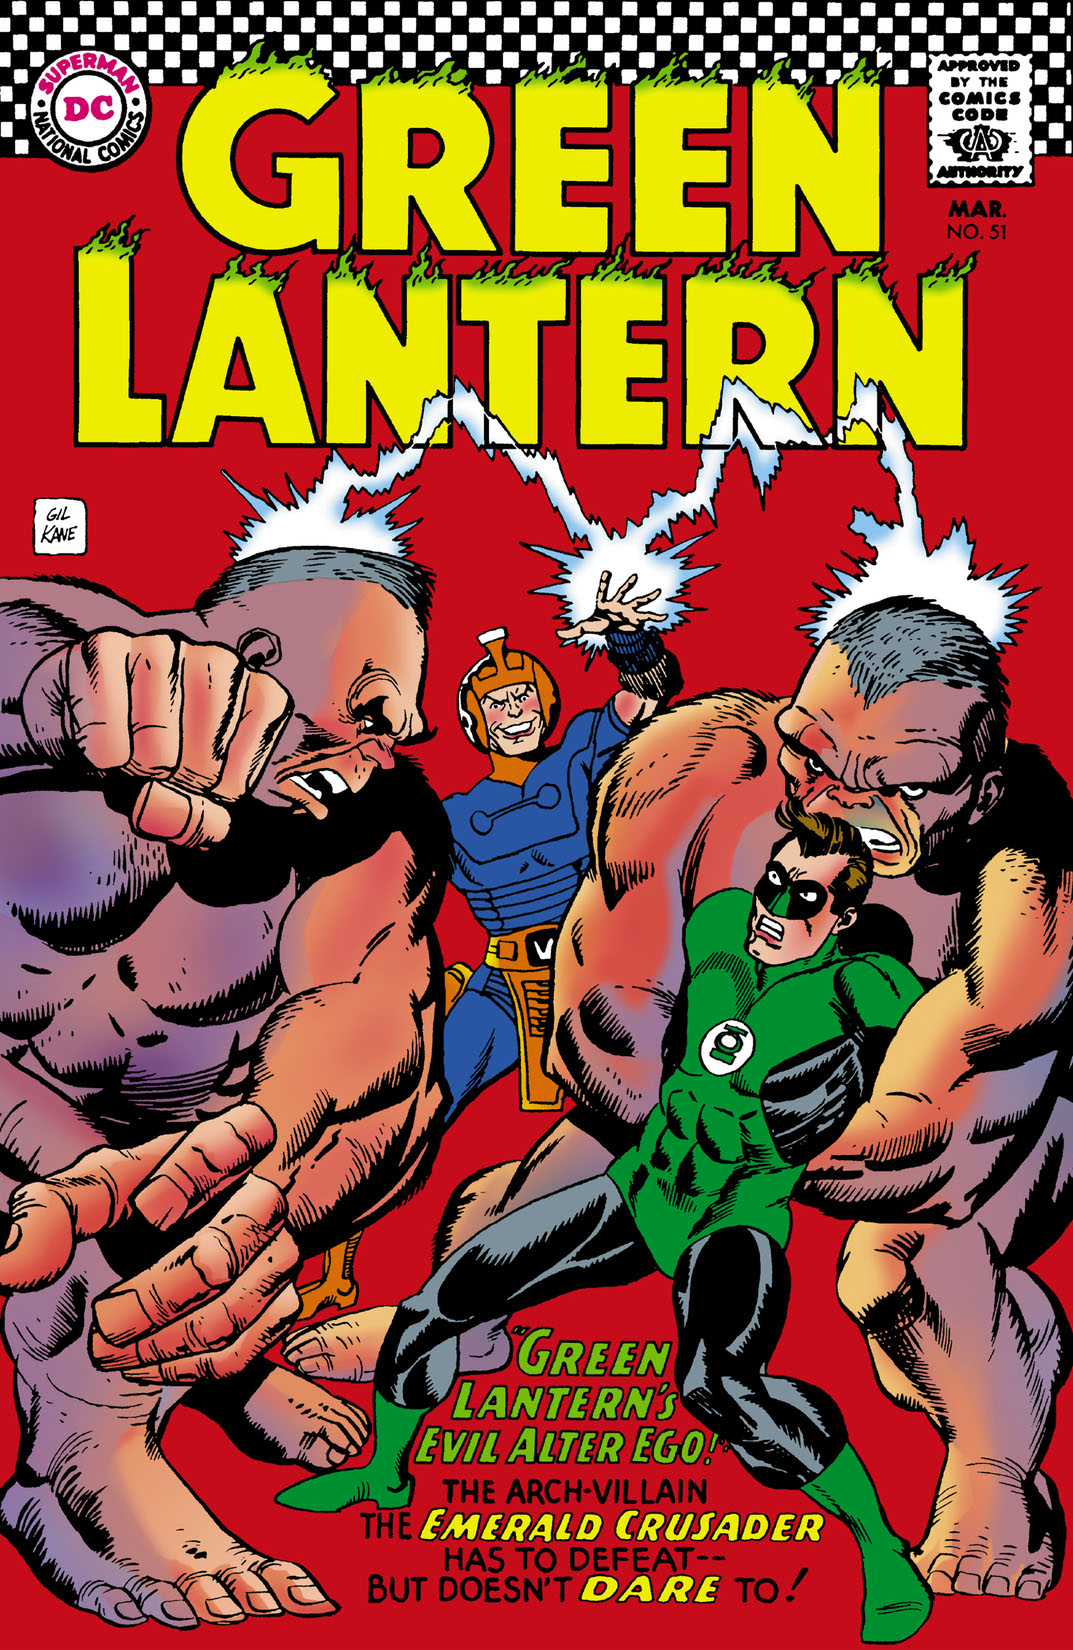 Green Lantern (1960-) #51 preview images